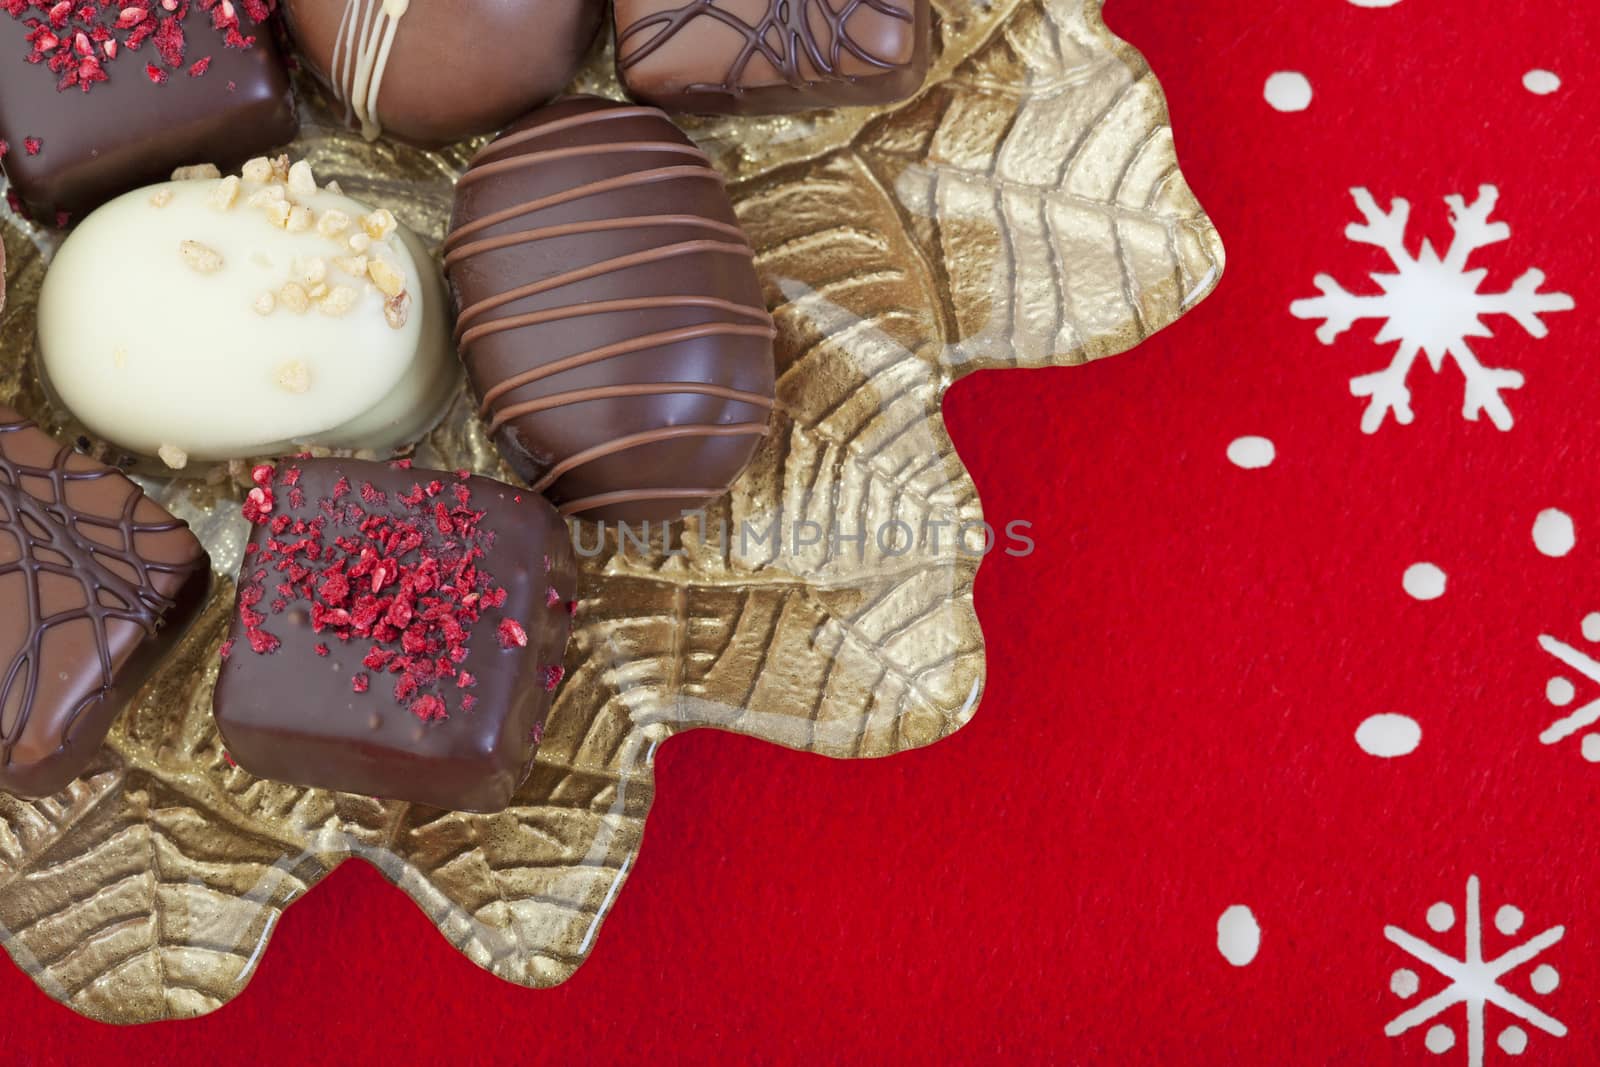 A variety of decandent chocolates arranged on a gold poinsettia plate, on a red felt snowflake mat.